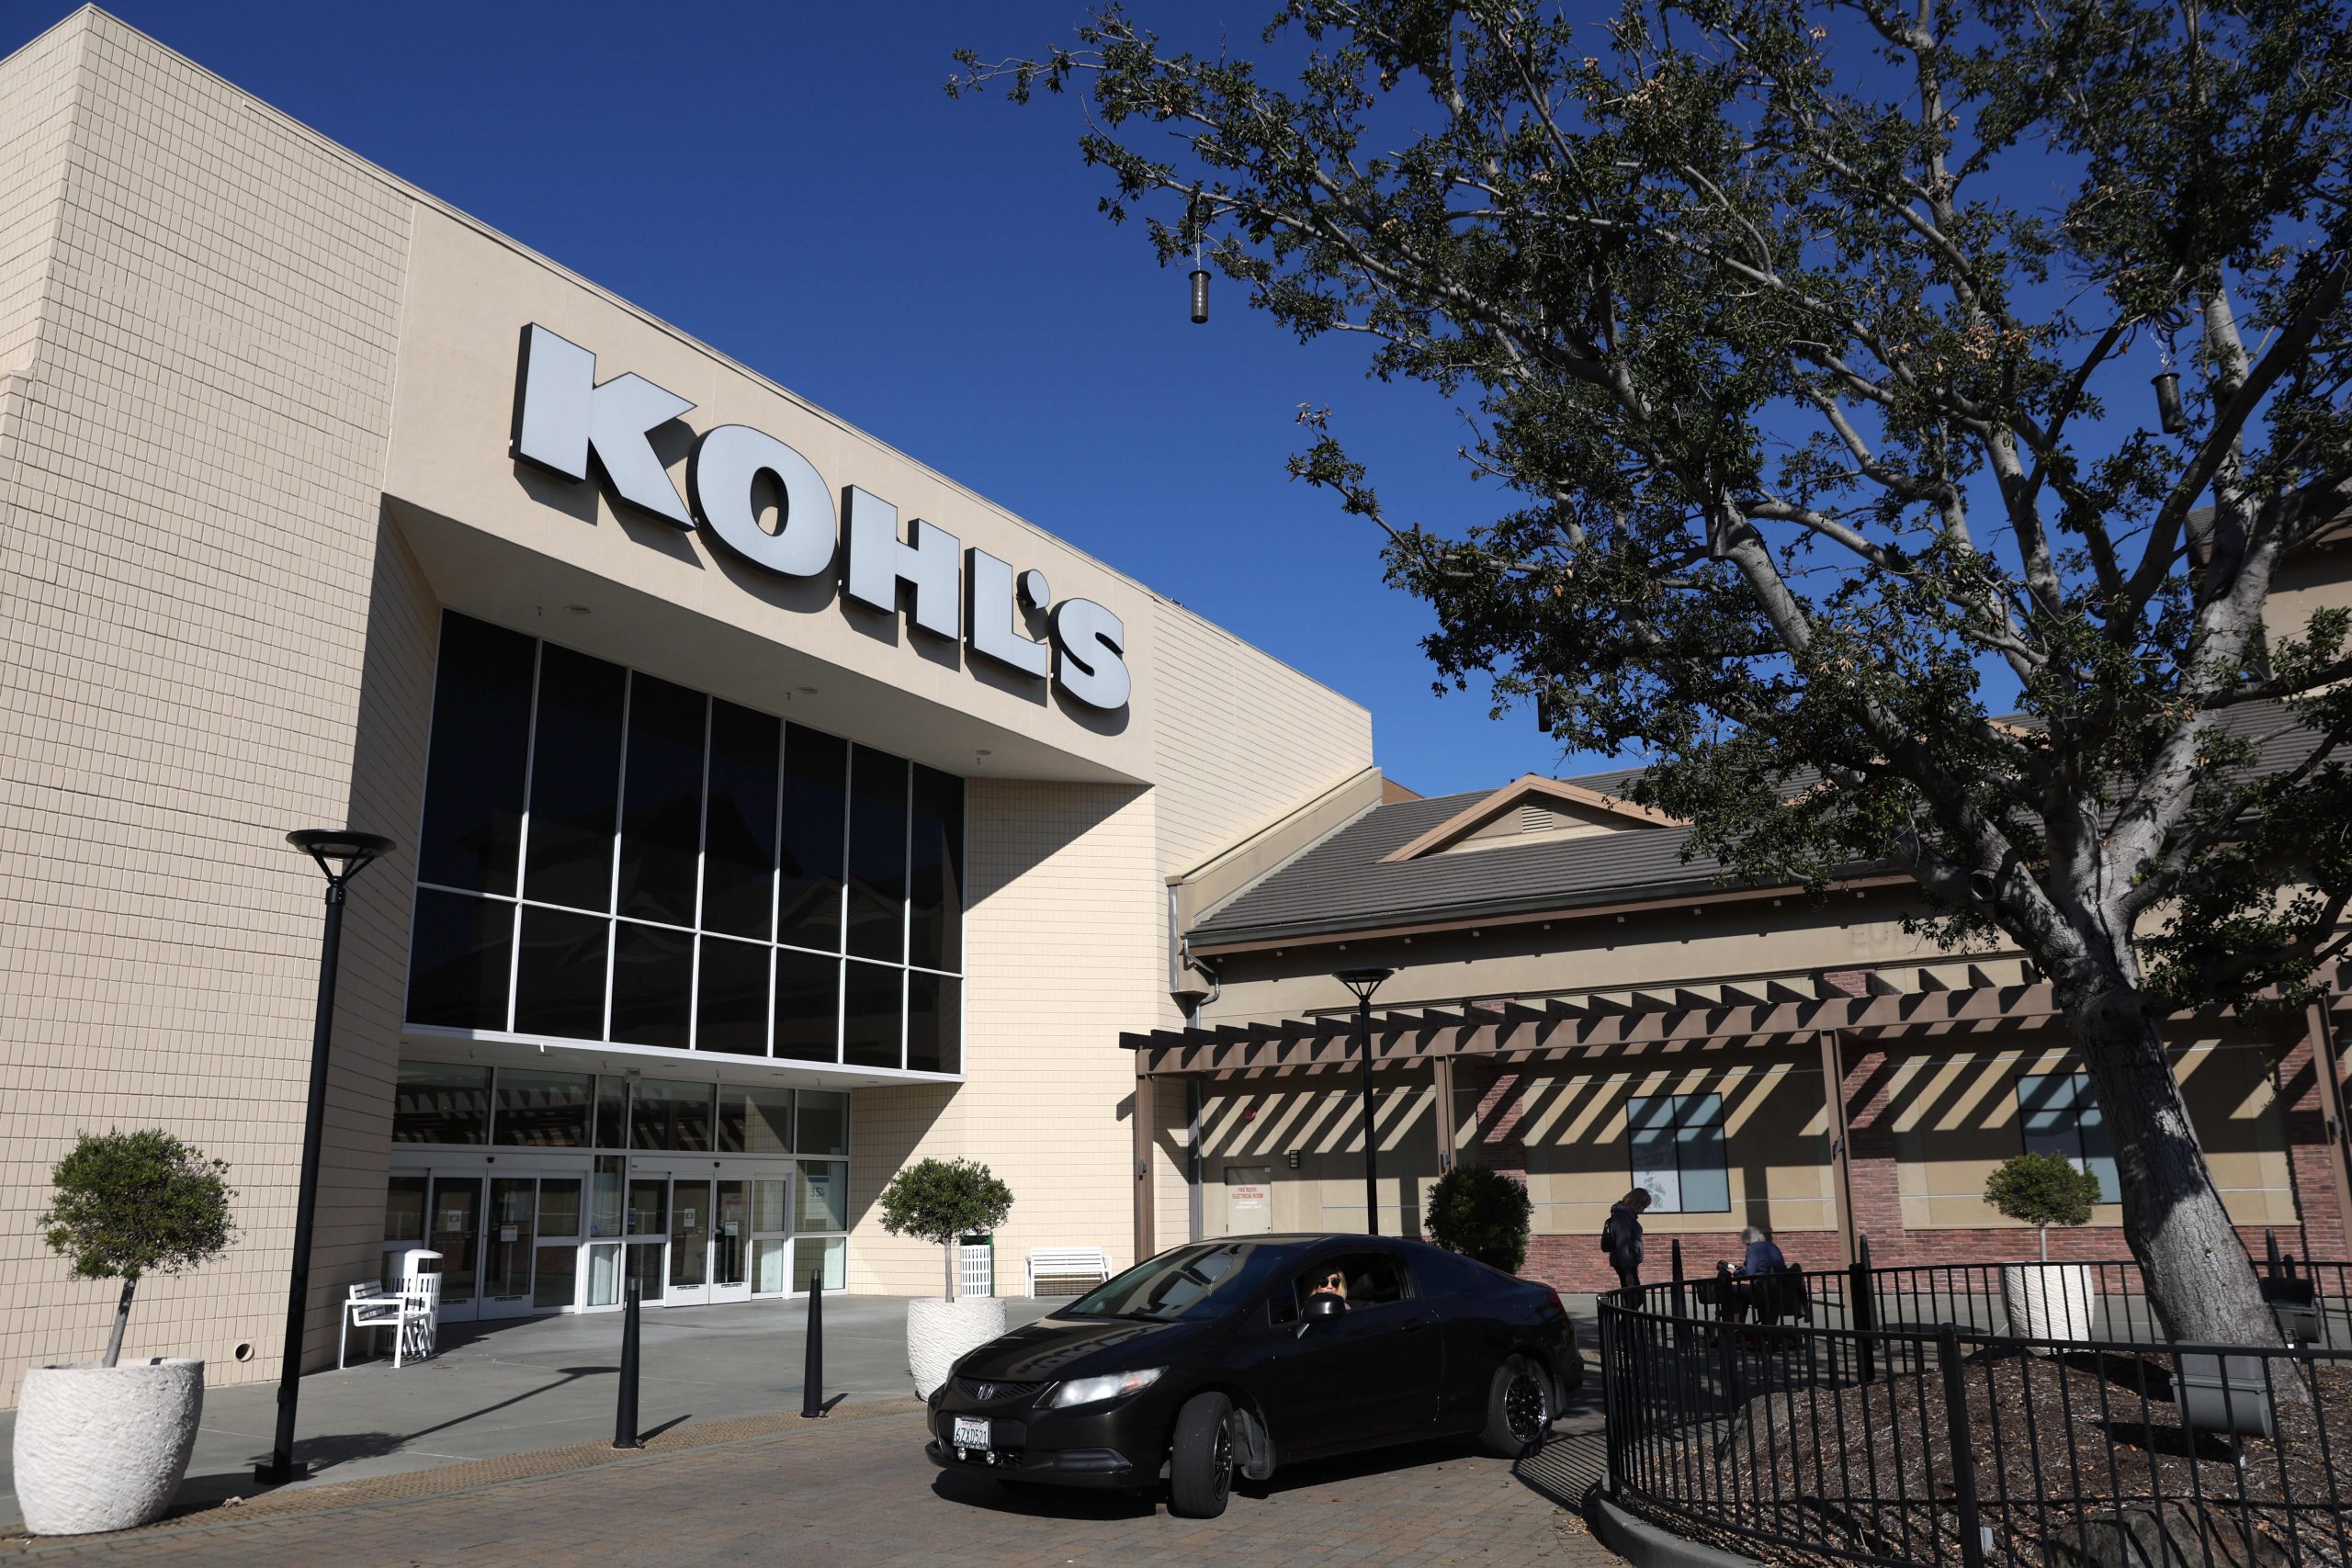 Kohl’s (KSS) issues long-term financial targets at investor day 2022